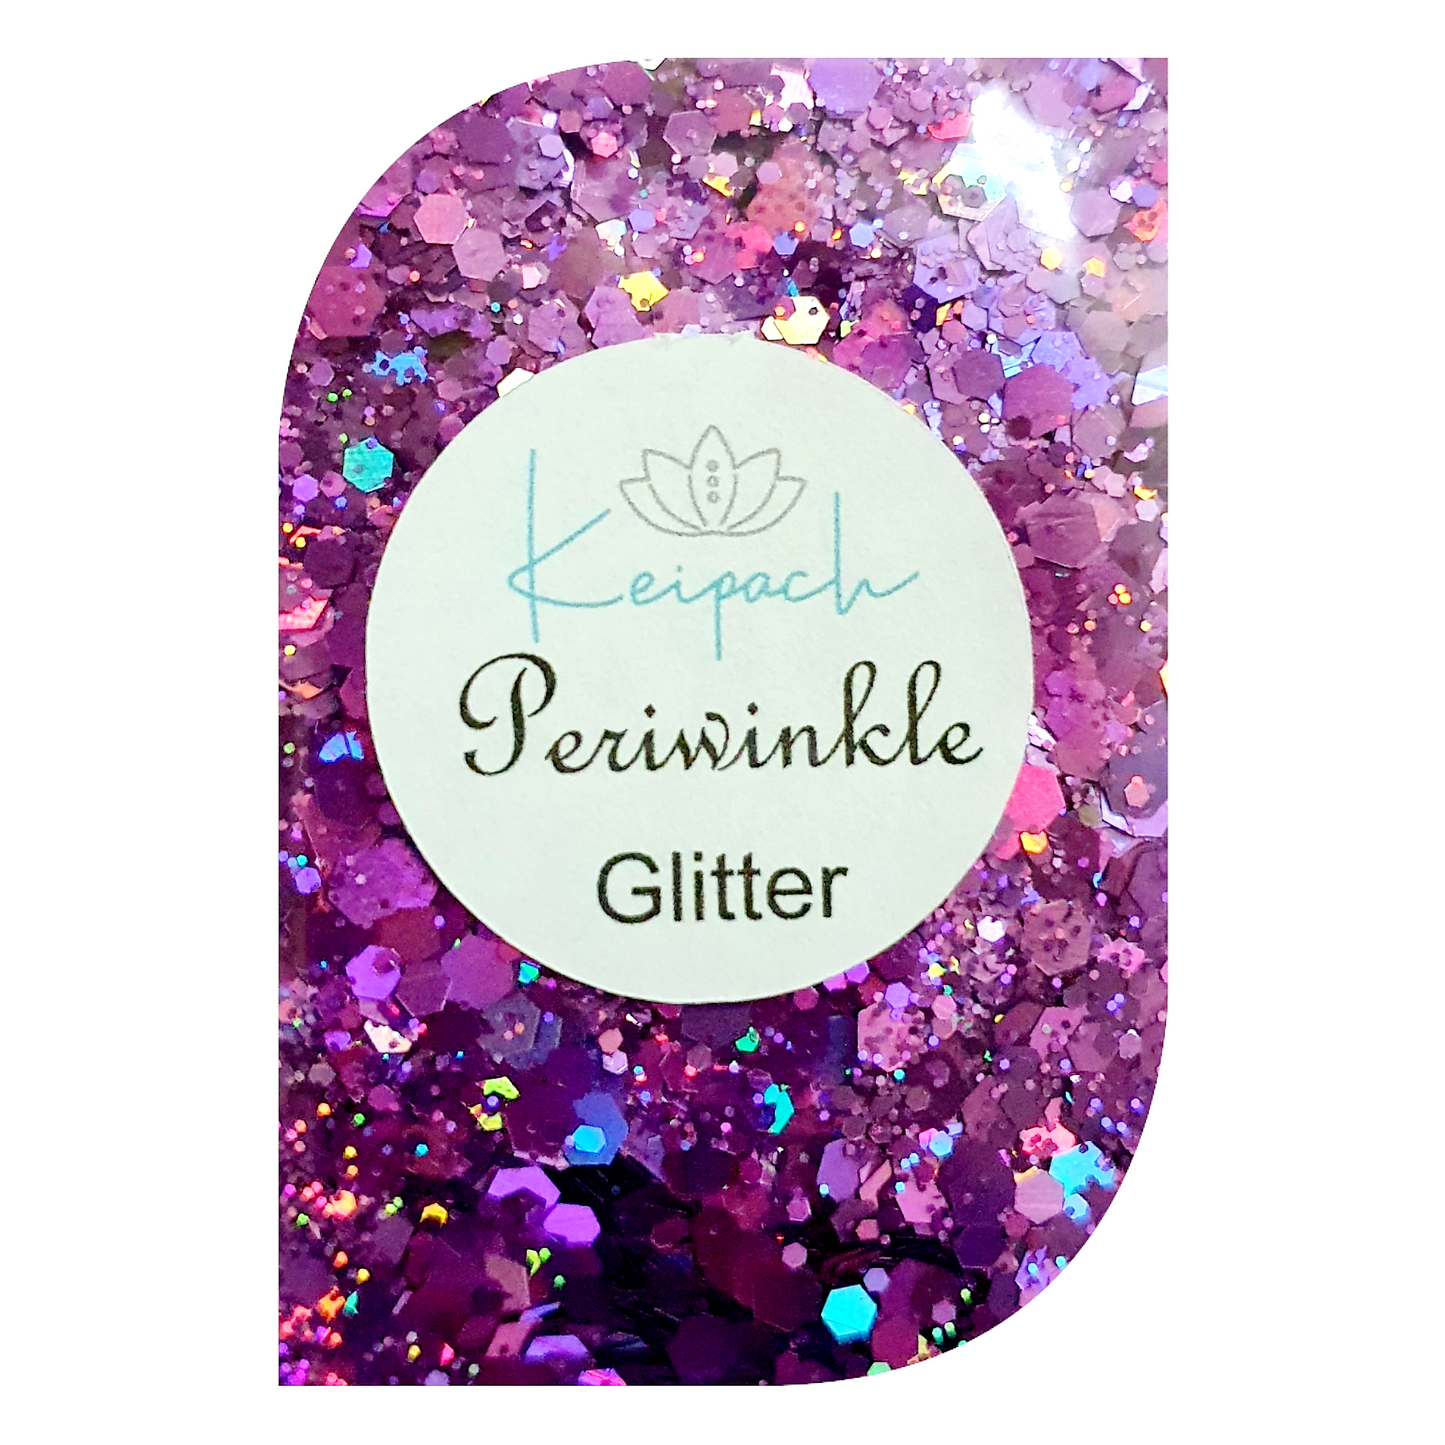 Chunky Holographic Glitter - Periwinkle - Keipach